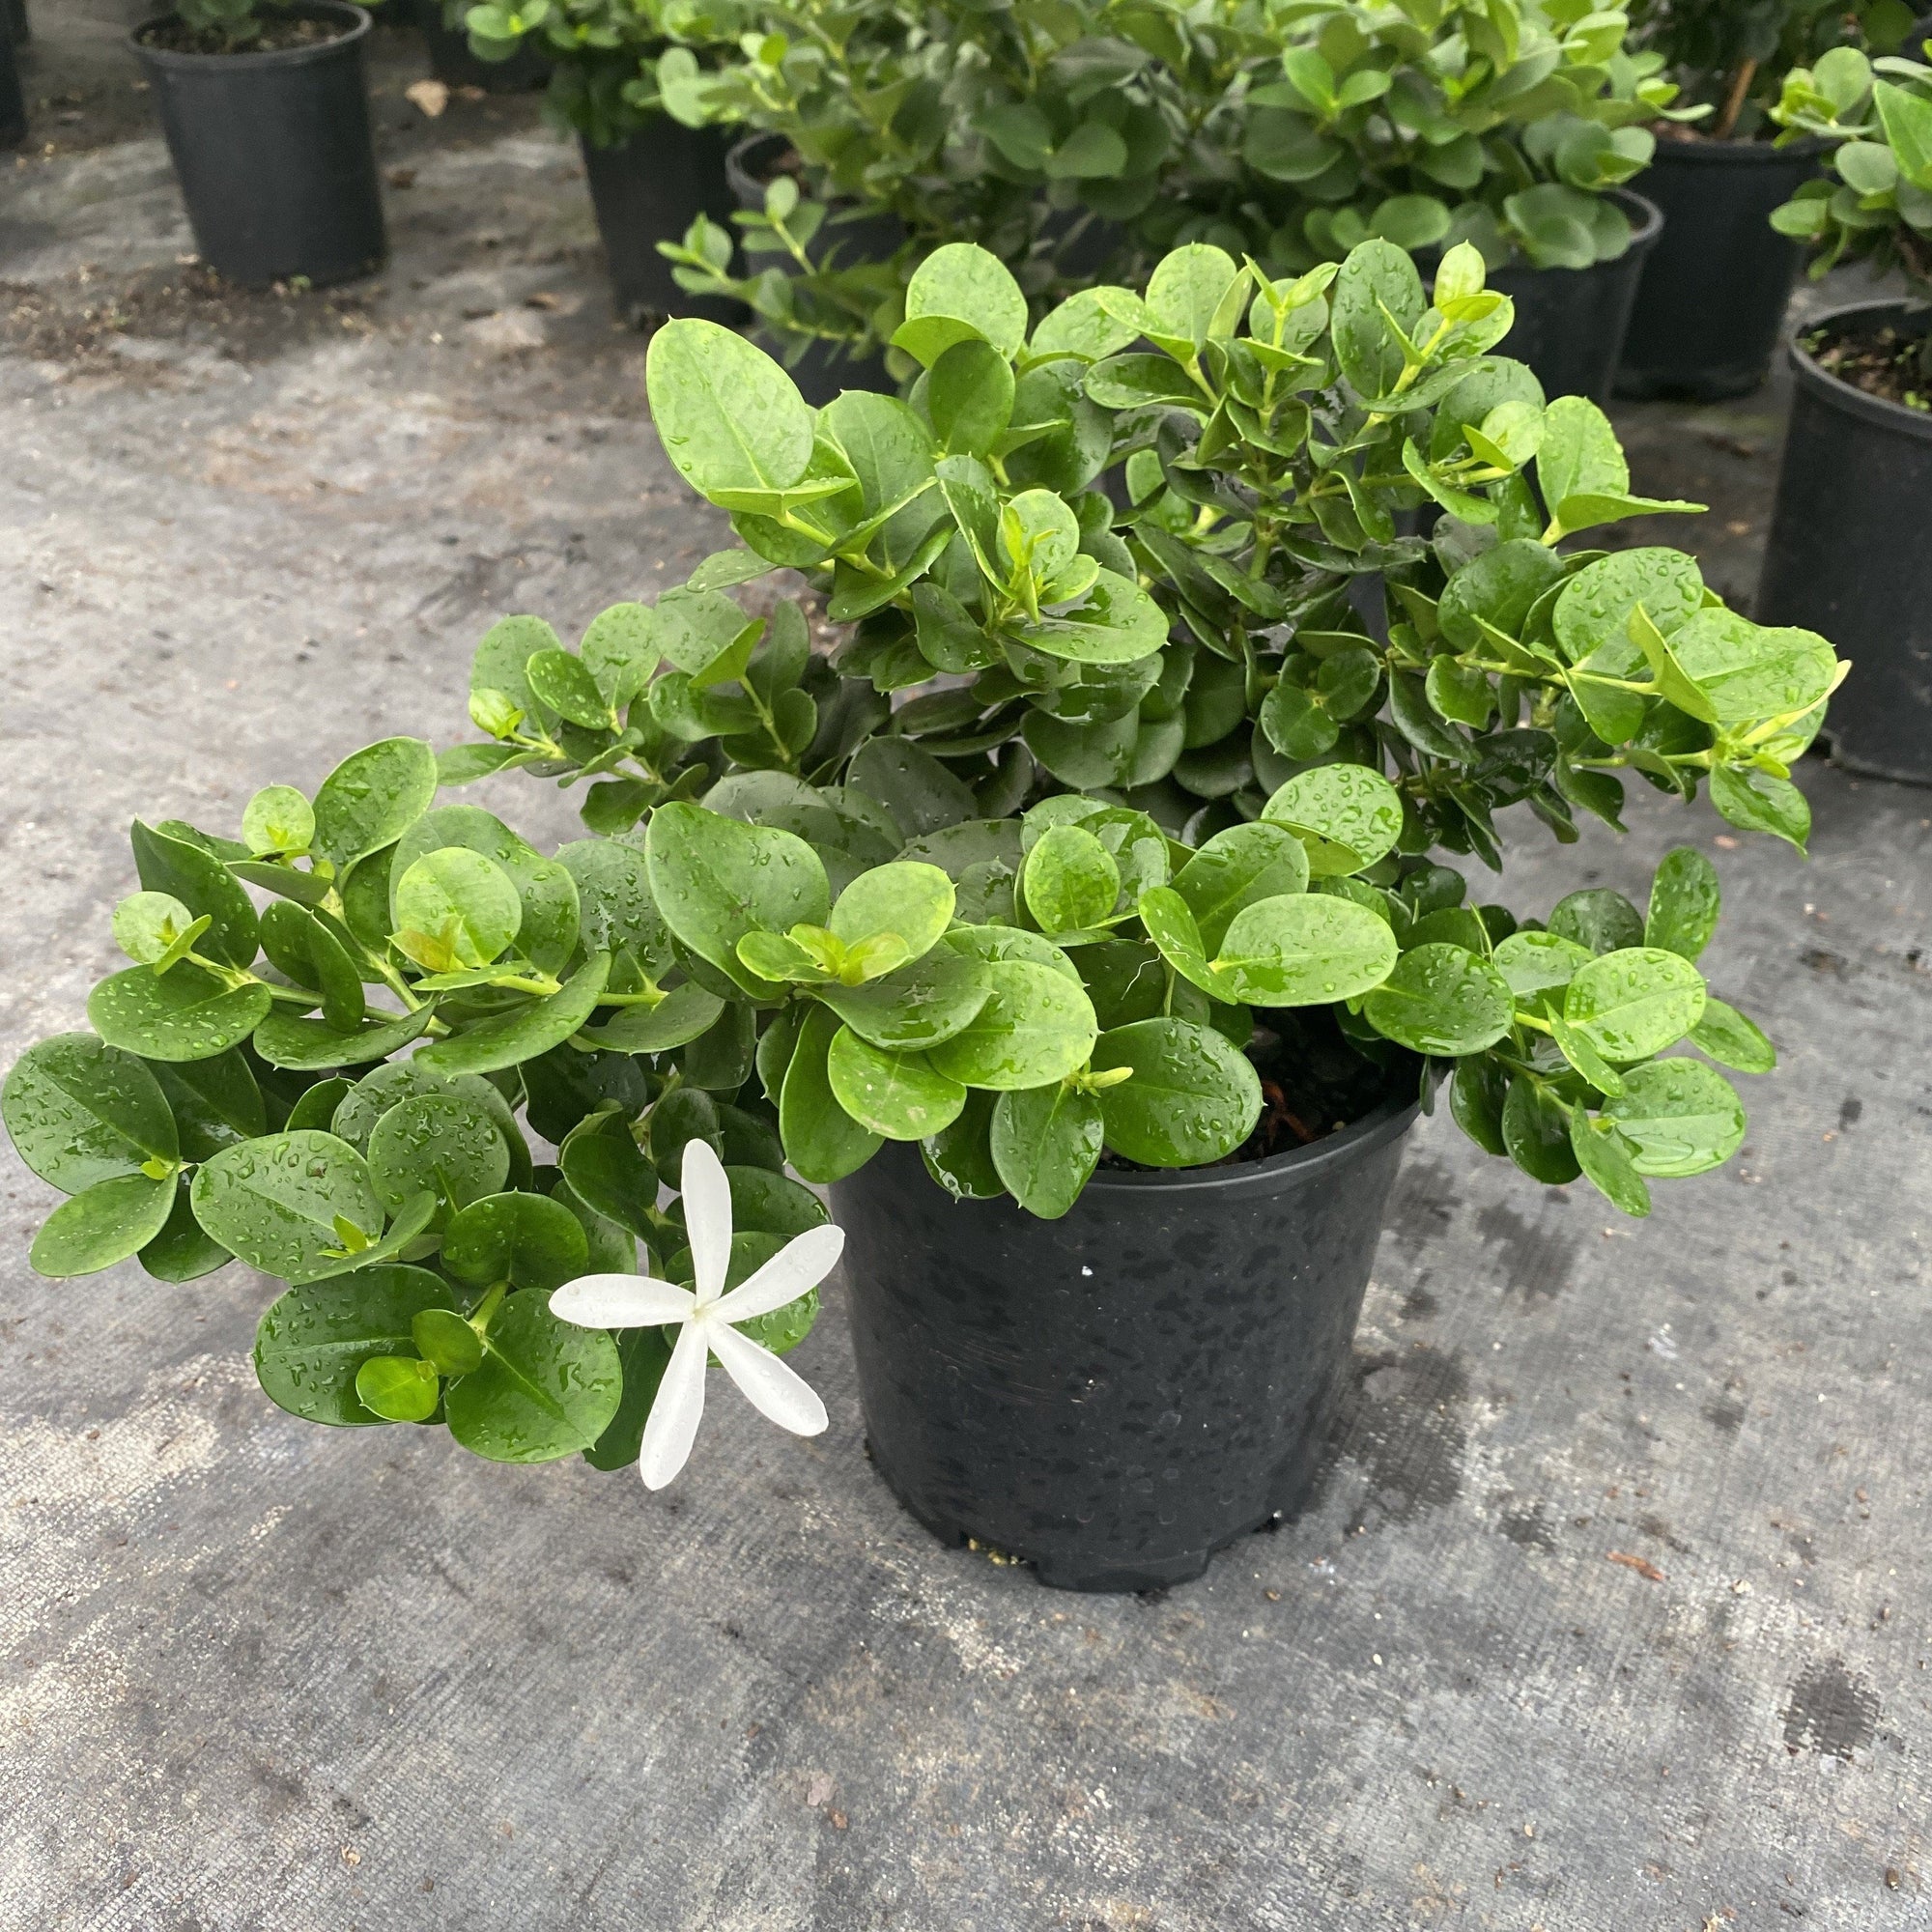 Attractive small, compact shrub with thick, rounded, glossy foliage and white scented star shaped flowers